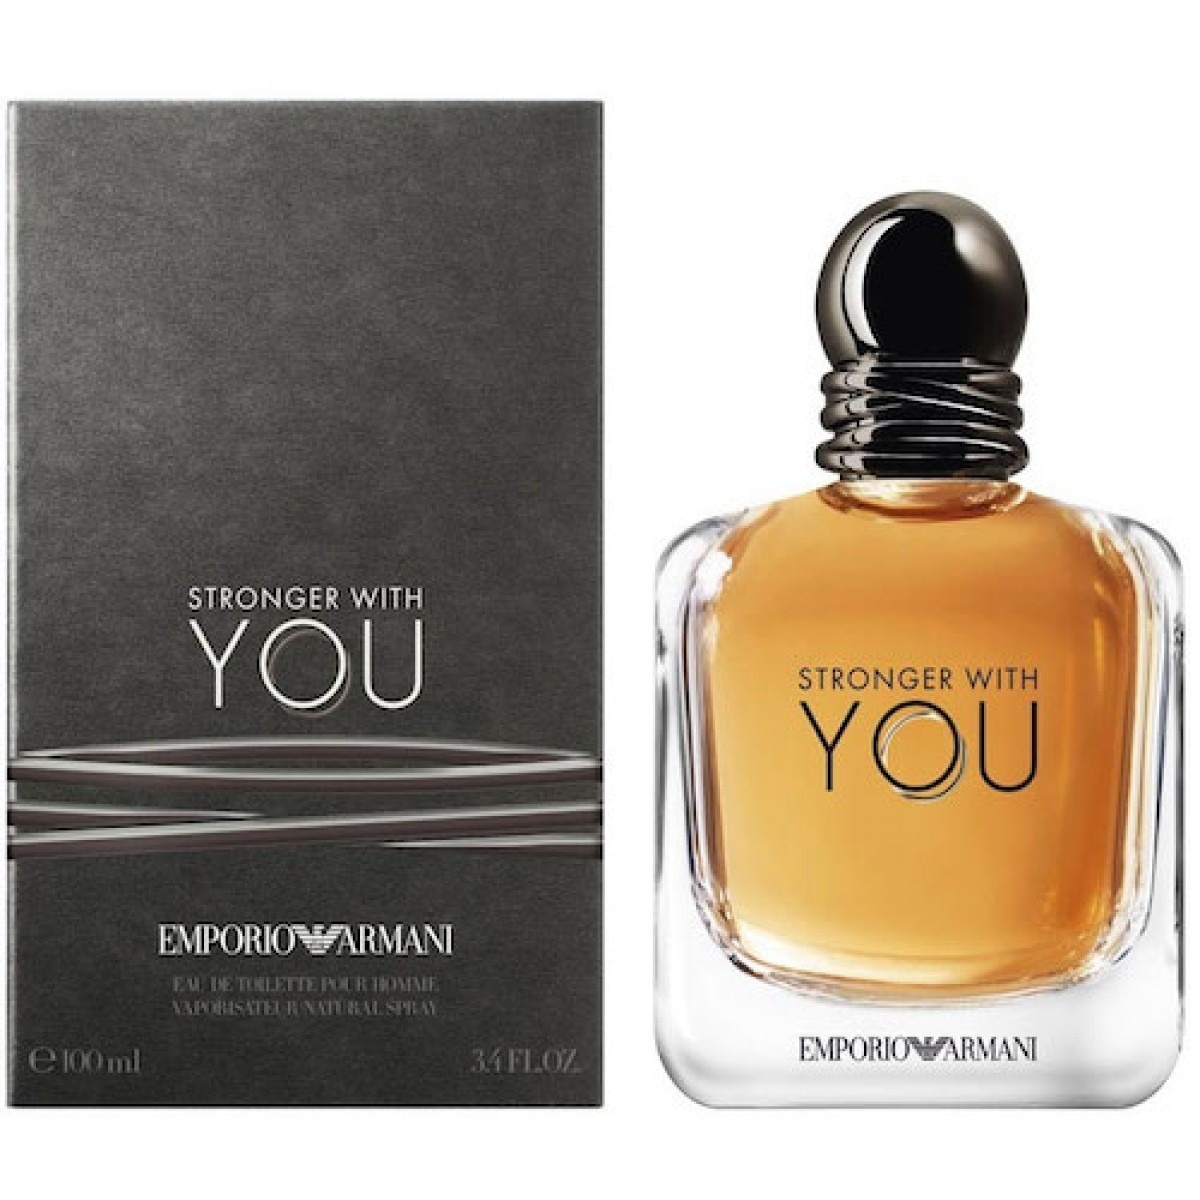 stronger with you men's cologne